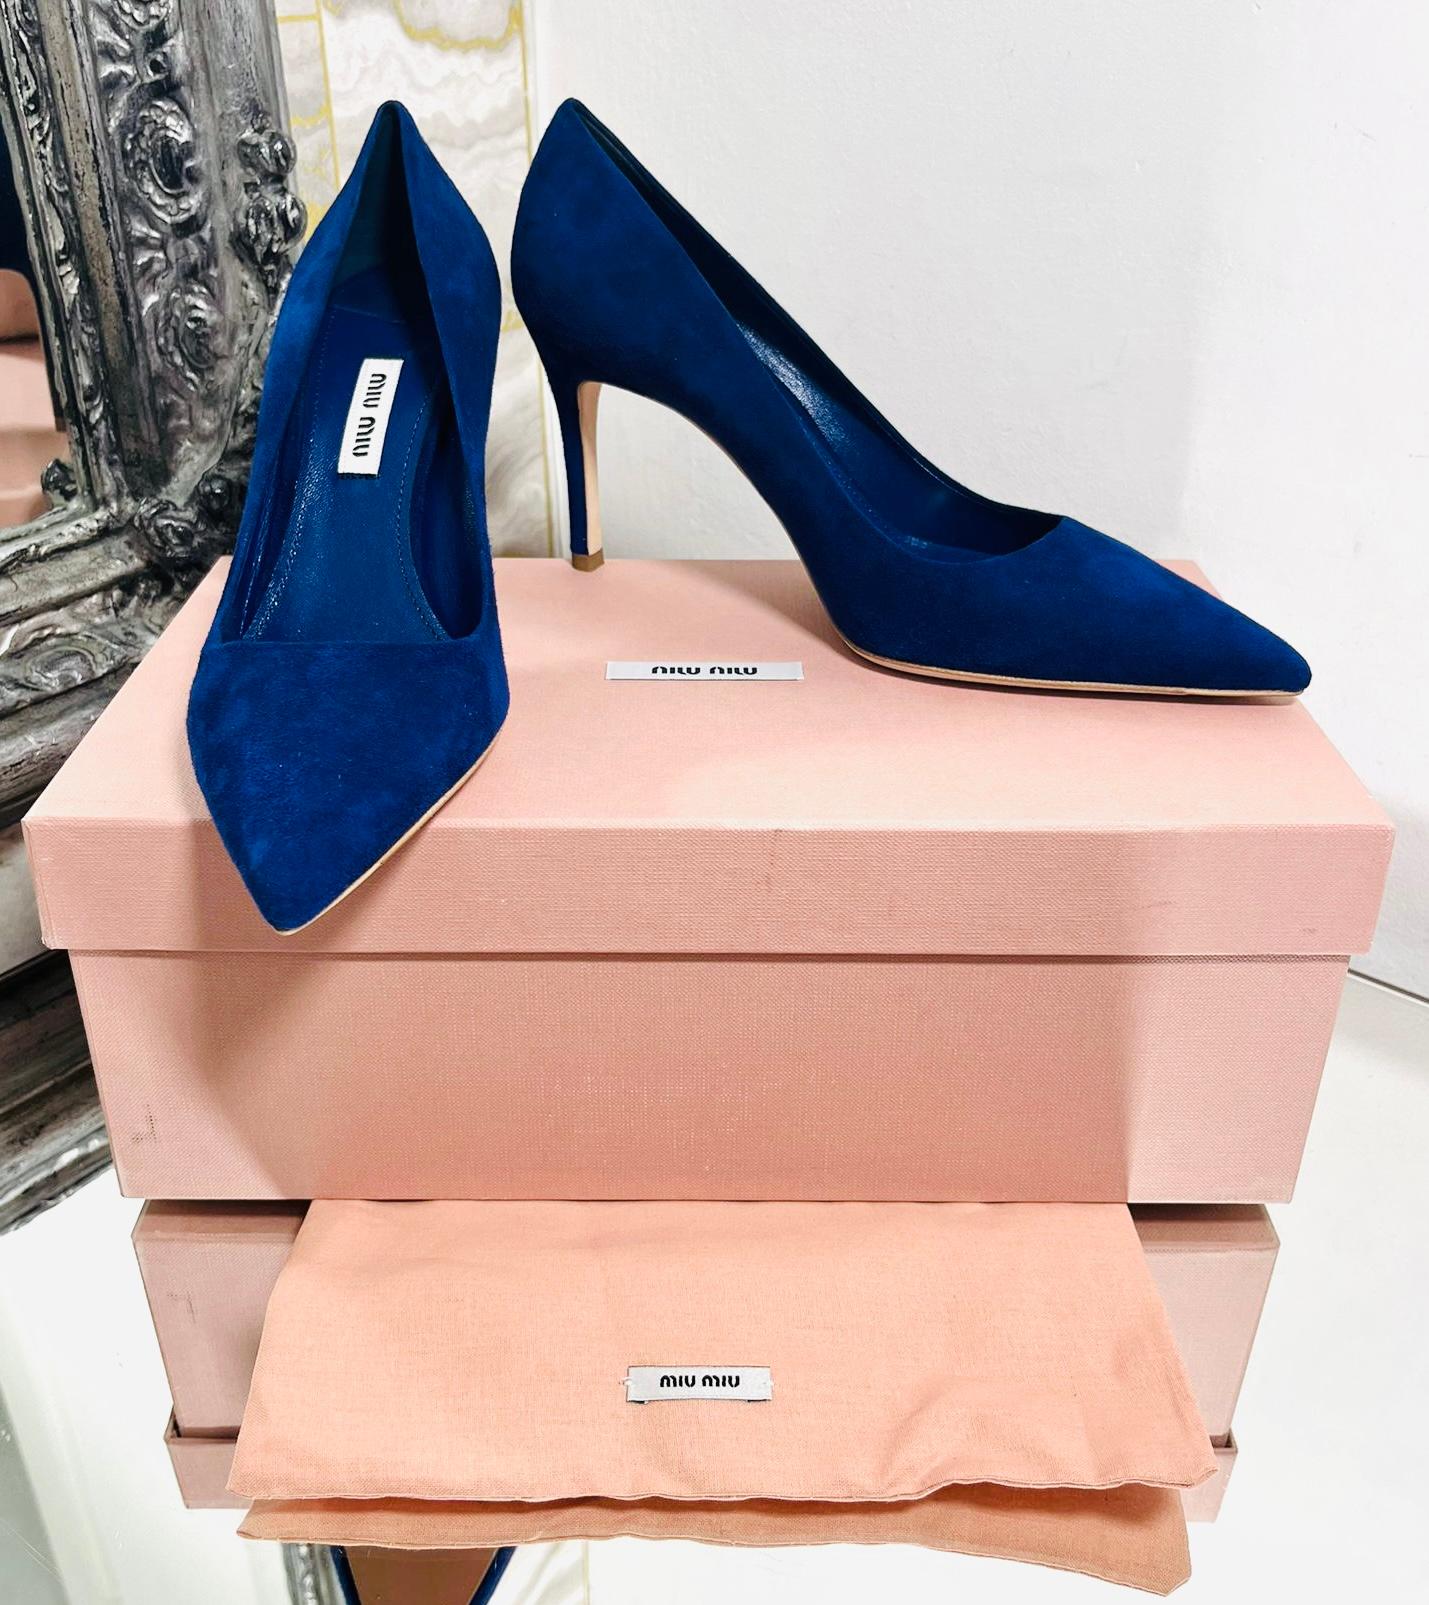 Miu Miu Suede Pumps

Cobalt blue heels designed with a pointed toe and stiletto heel.

Featuring leather lining, insoles and soles.

Size – 37

Condition – Excellent/Brand New

Composition – Suede

Comes with – Box, Dust Bag
